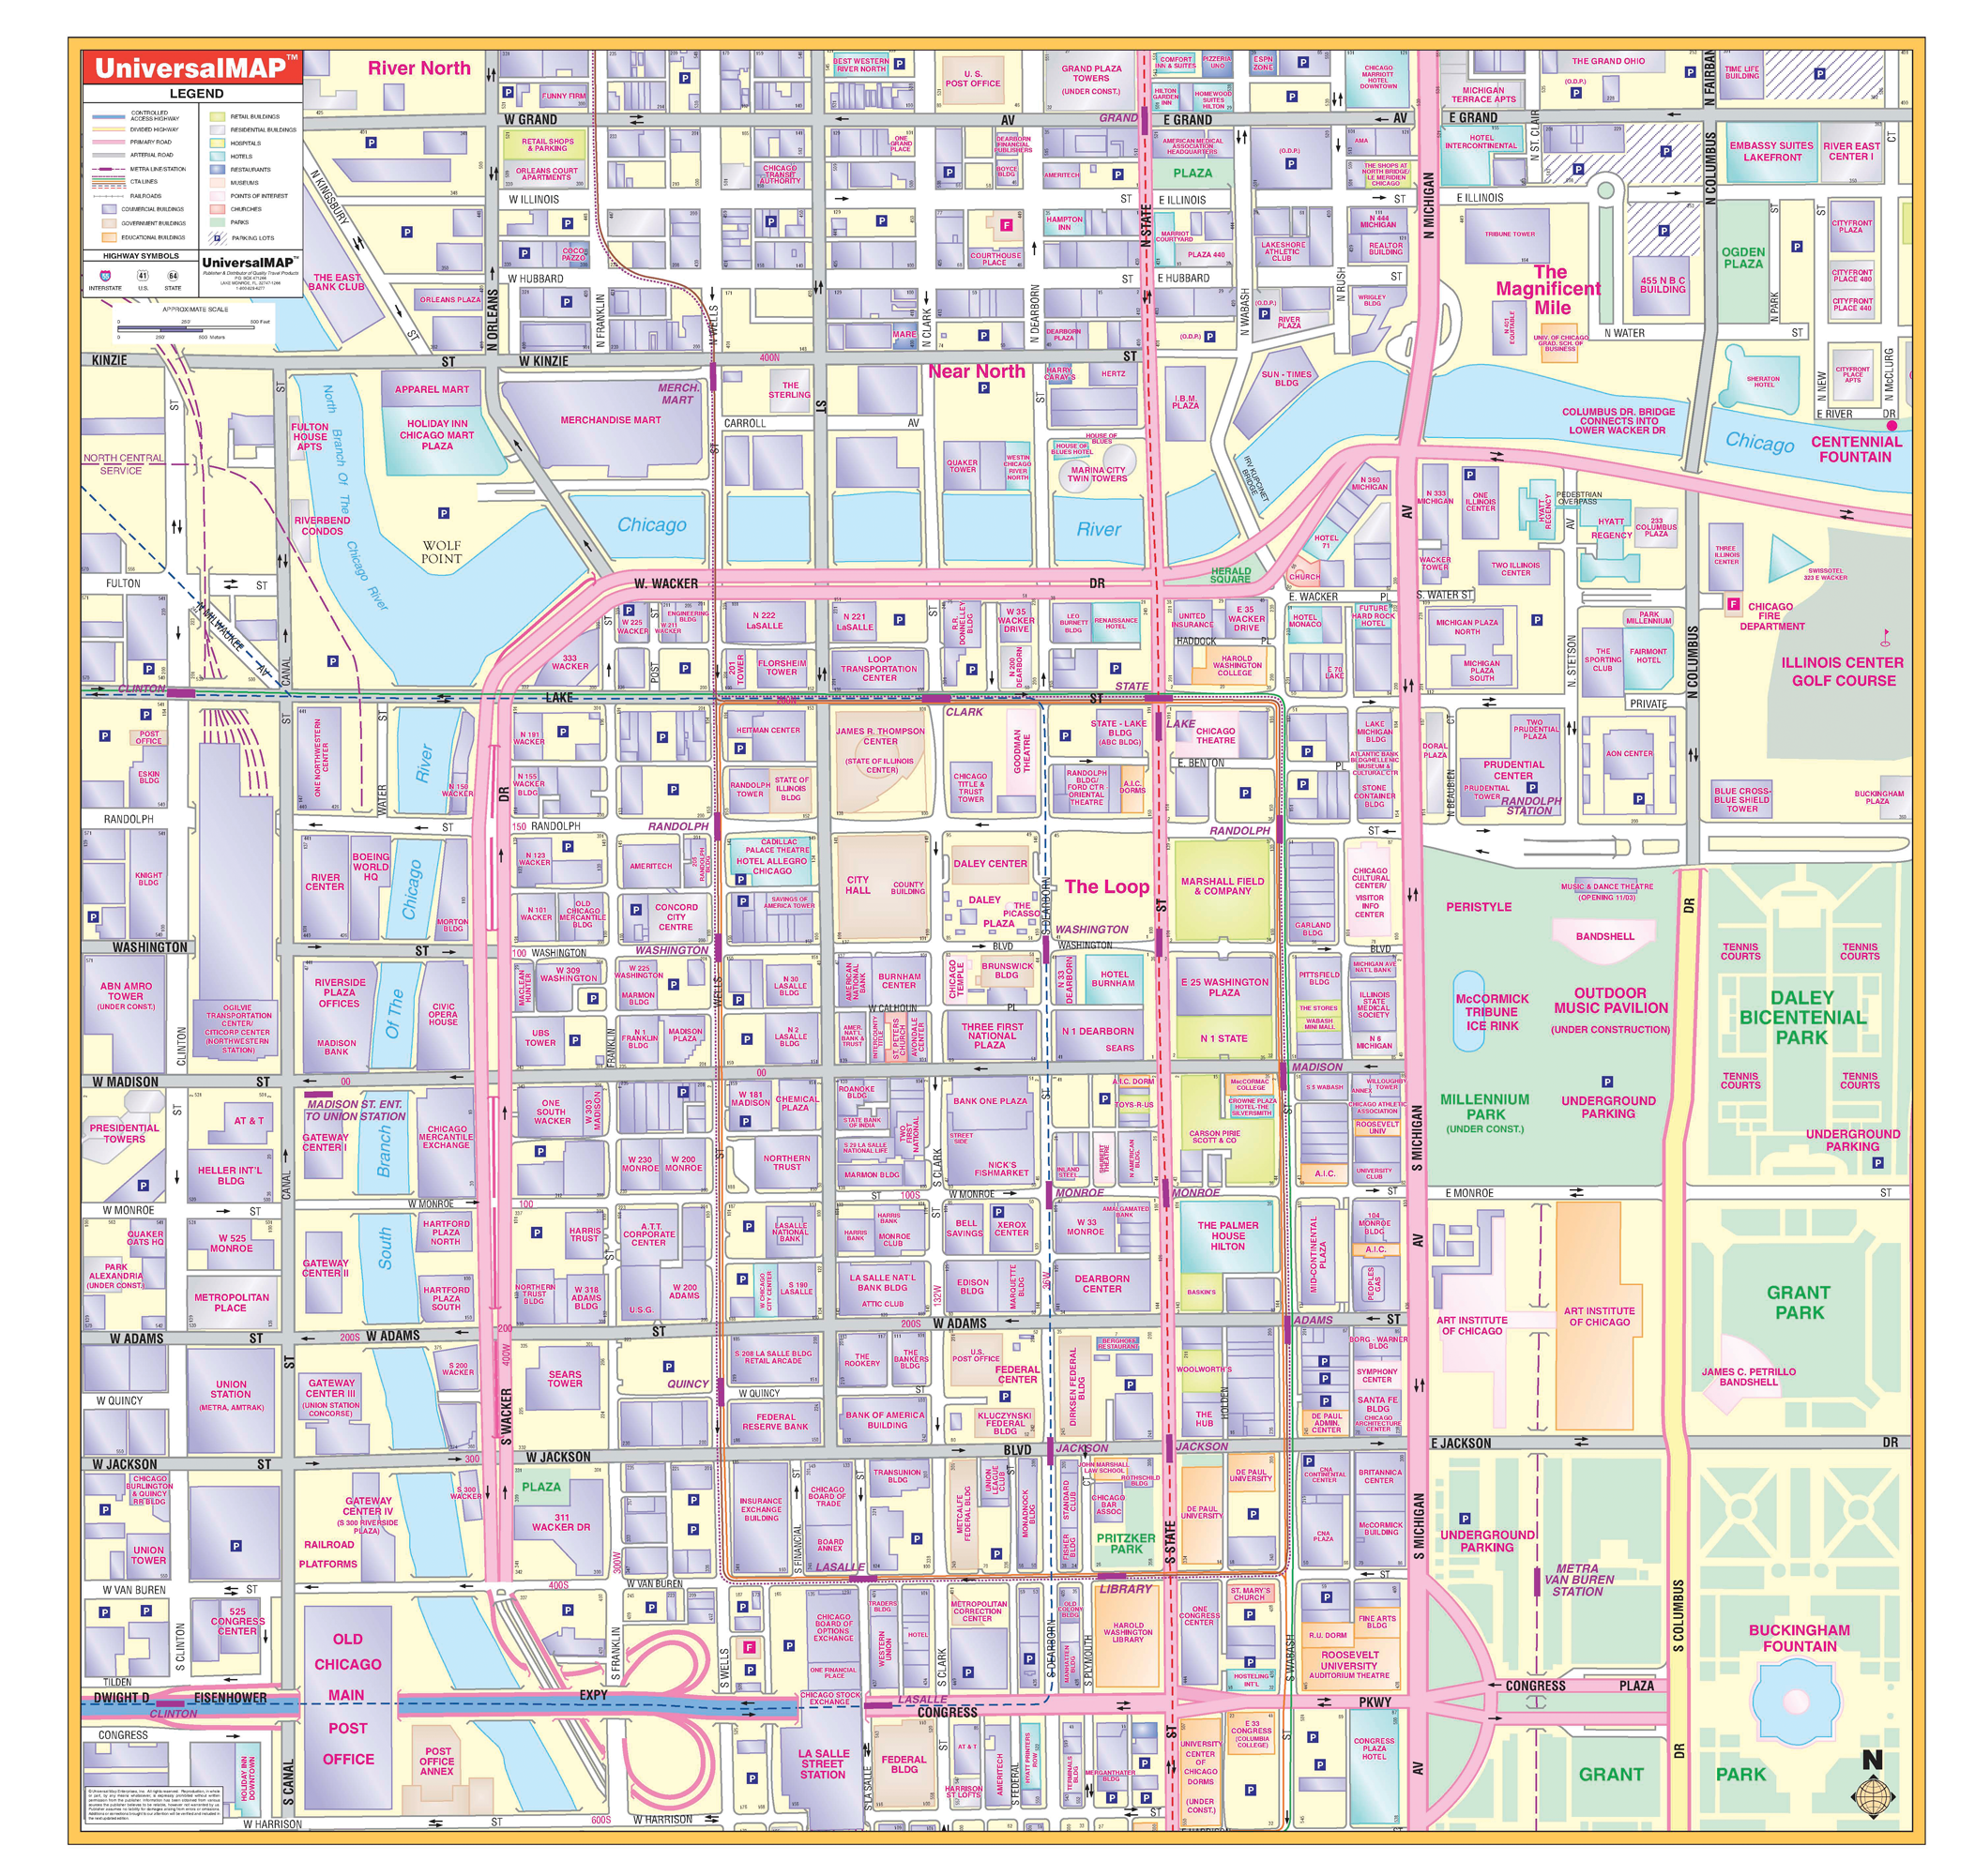 Chicago Loop, Il Wall Map - Large Laminated